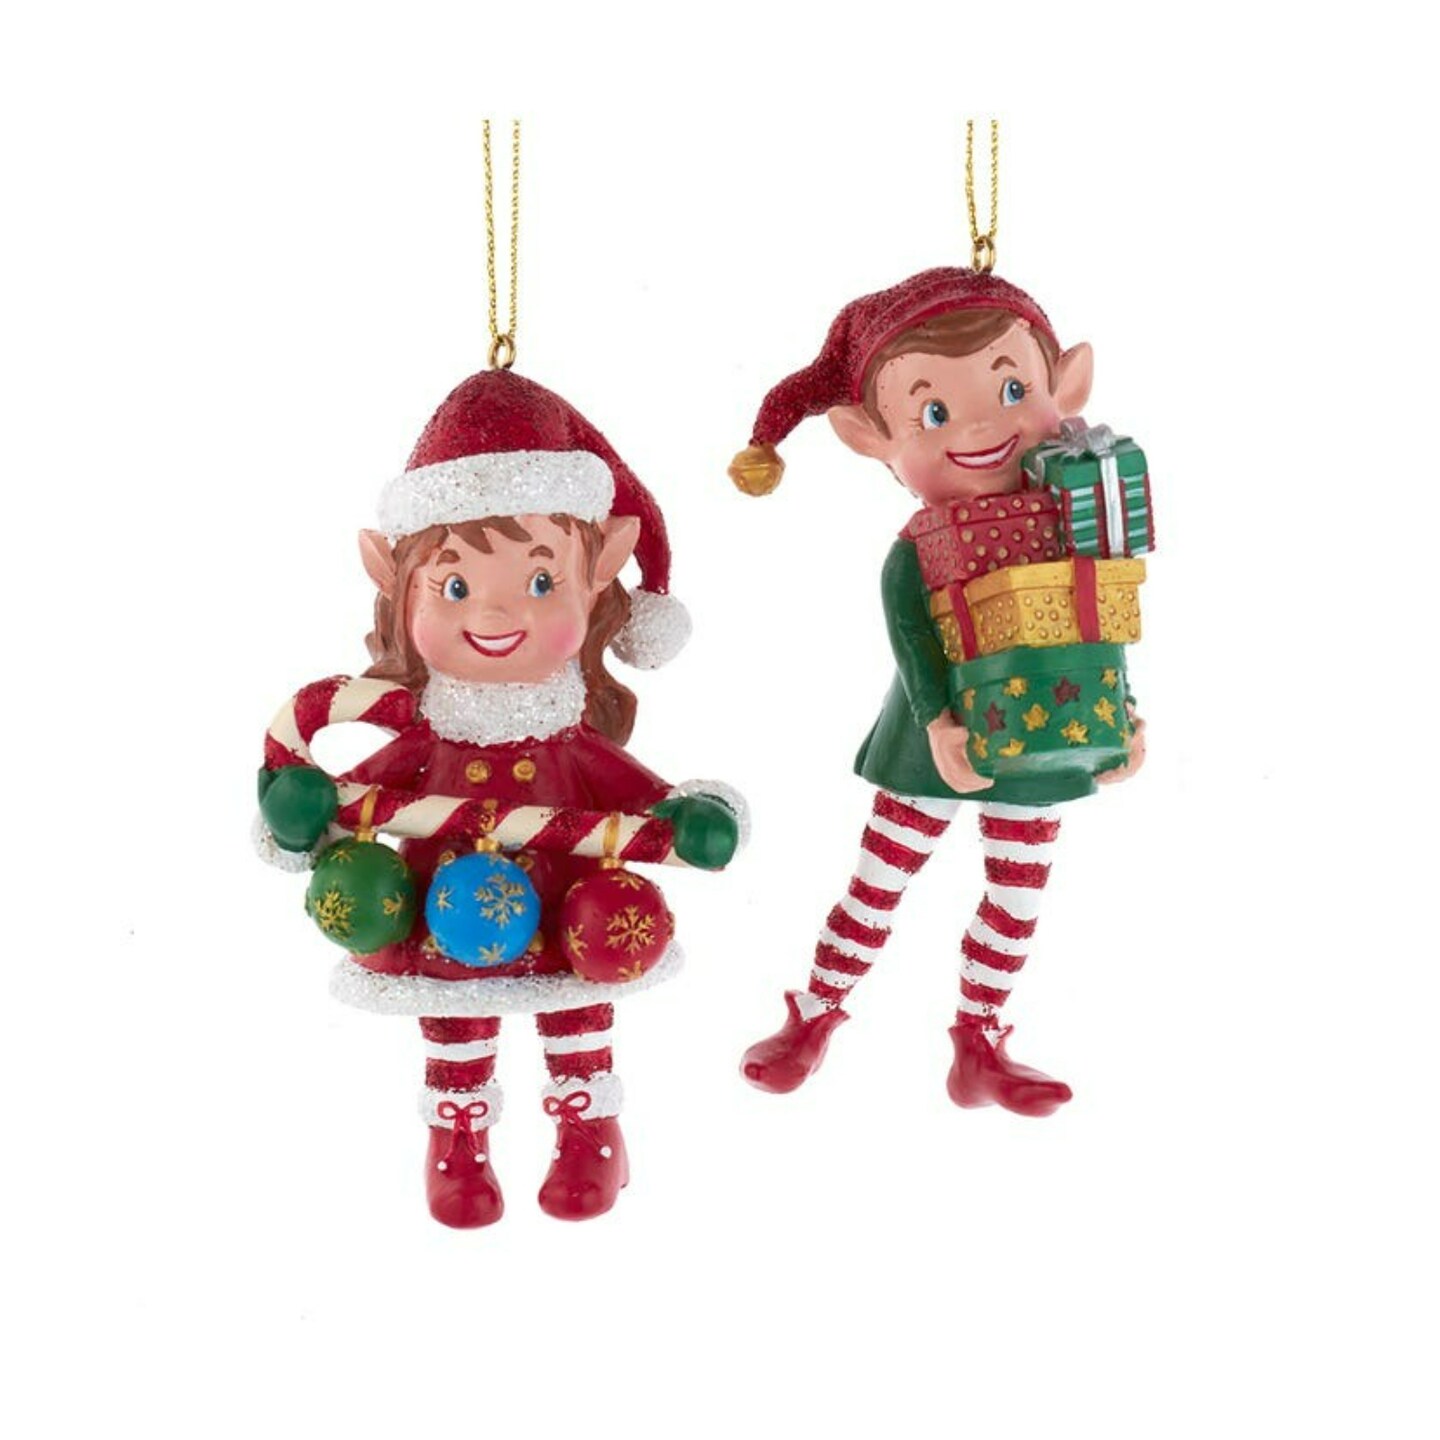 KSA Pack of 12 Red and Green Battery Operated LED Lantern Christmas  Ornaments 5